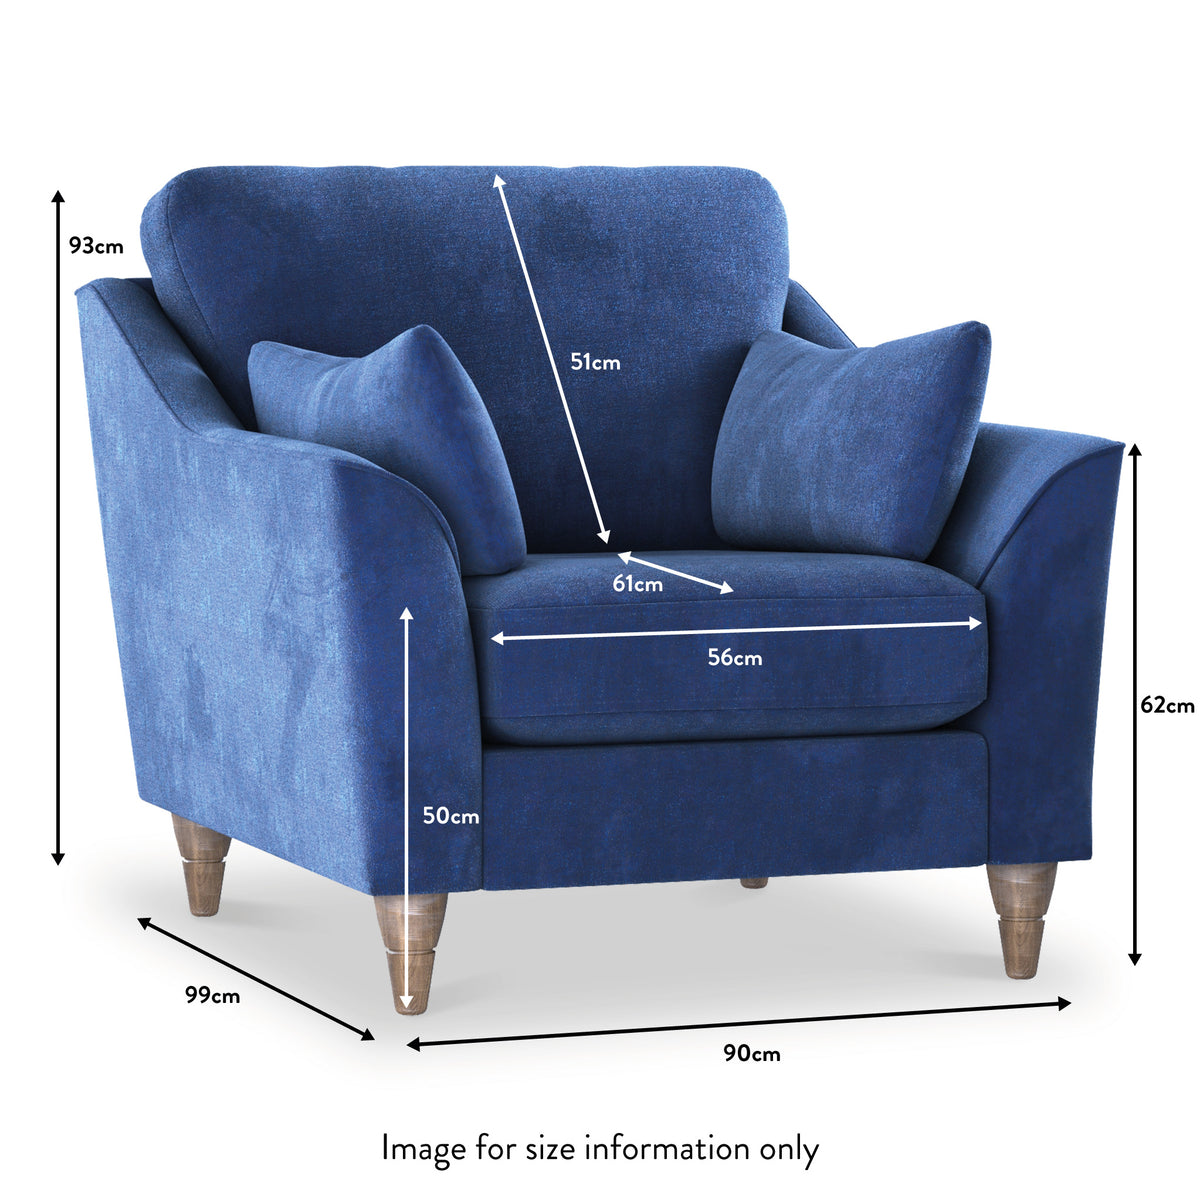 Charice Navy Armchair dimensions